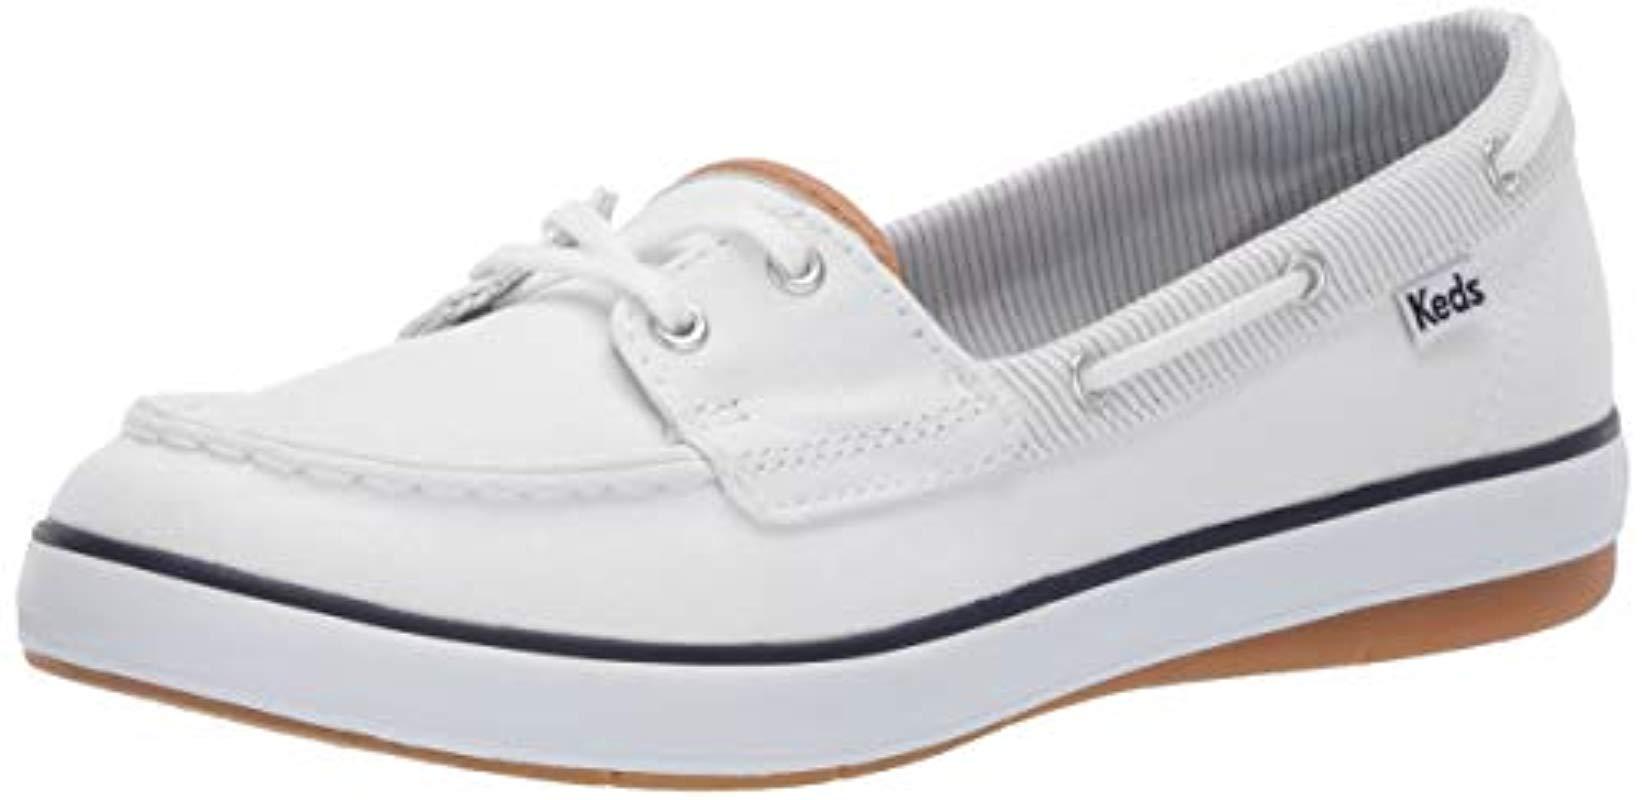 Keds Charter Boat Shoe in White | Lyst